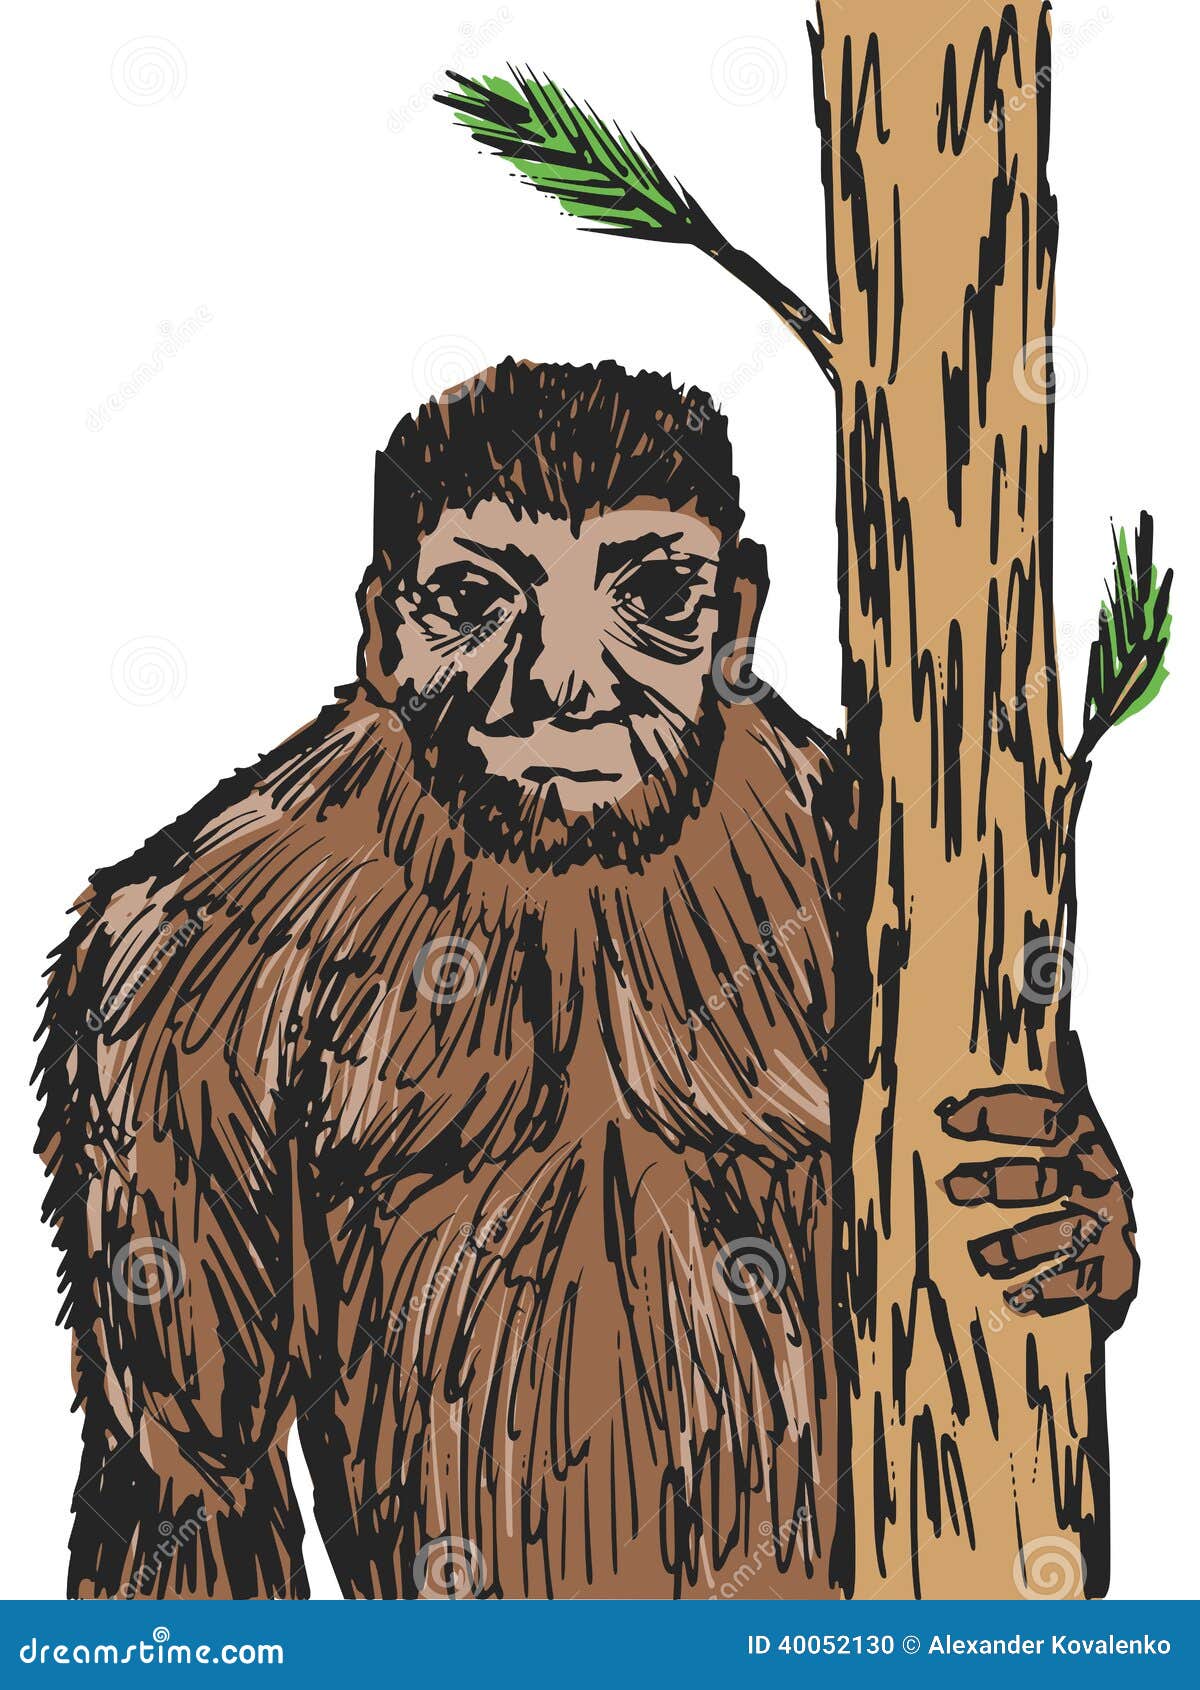 Bigfoot stock vector. Illustration of mutant, funny, forest - 40052130